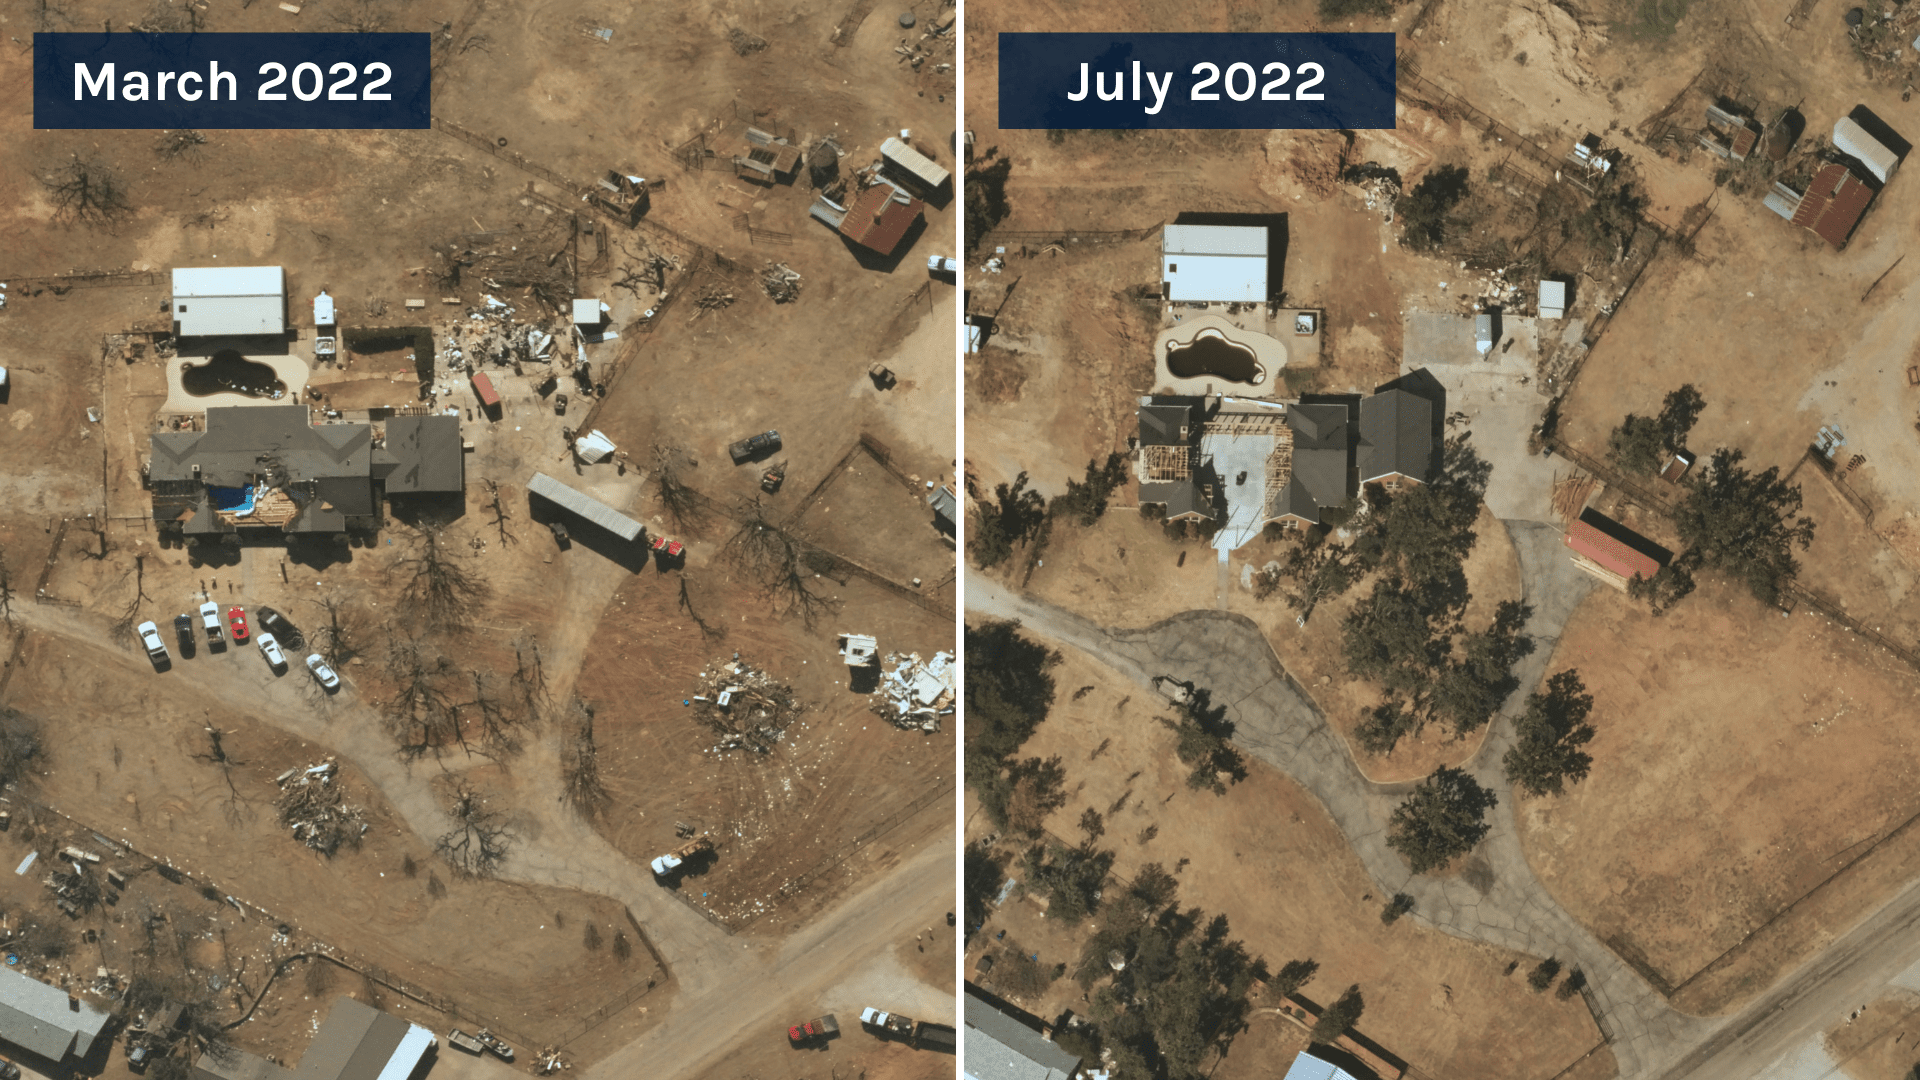 Near Space Labs' 10 cm captures of a damaged residential property following a tornado, and the same property four months later showing rebuilding and construction progress. 